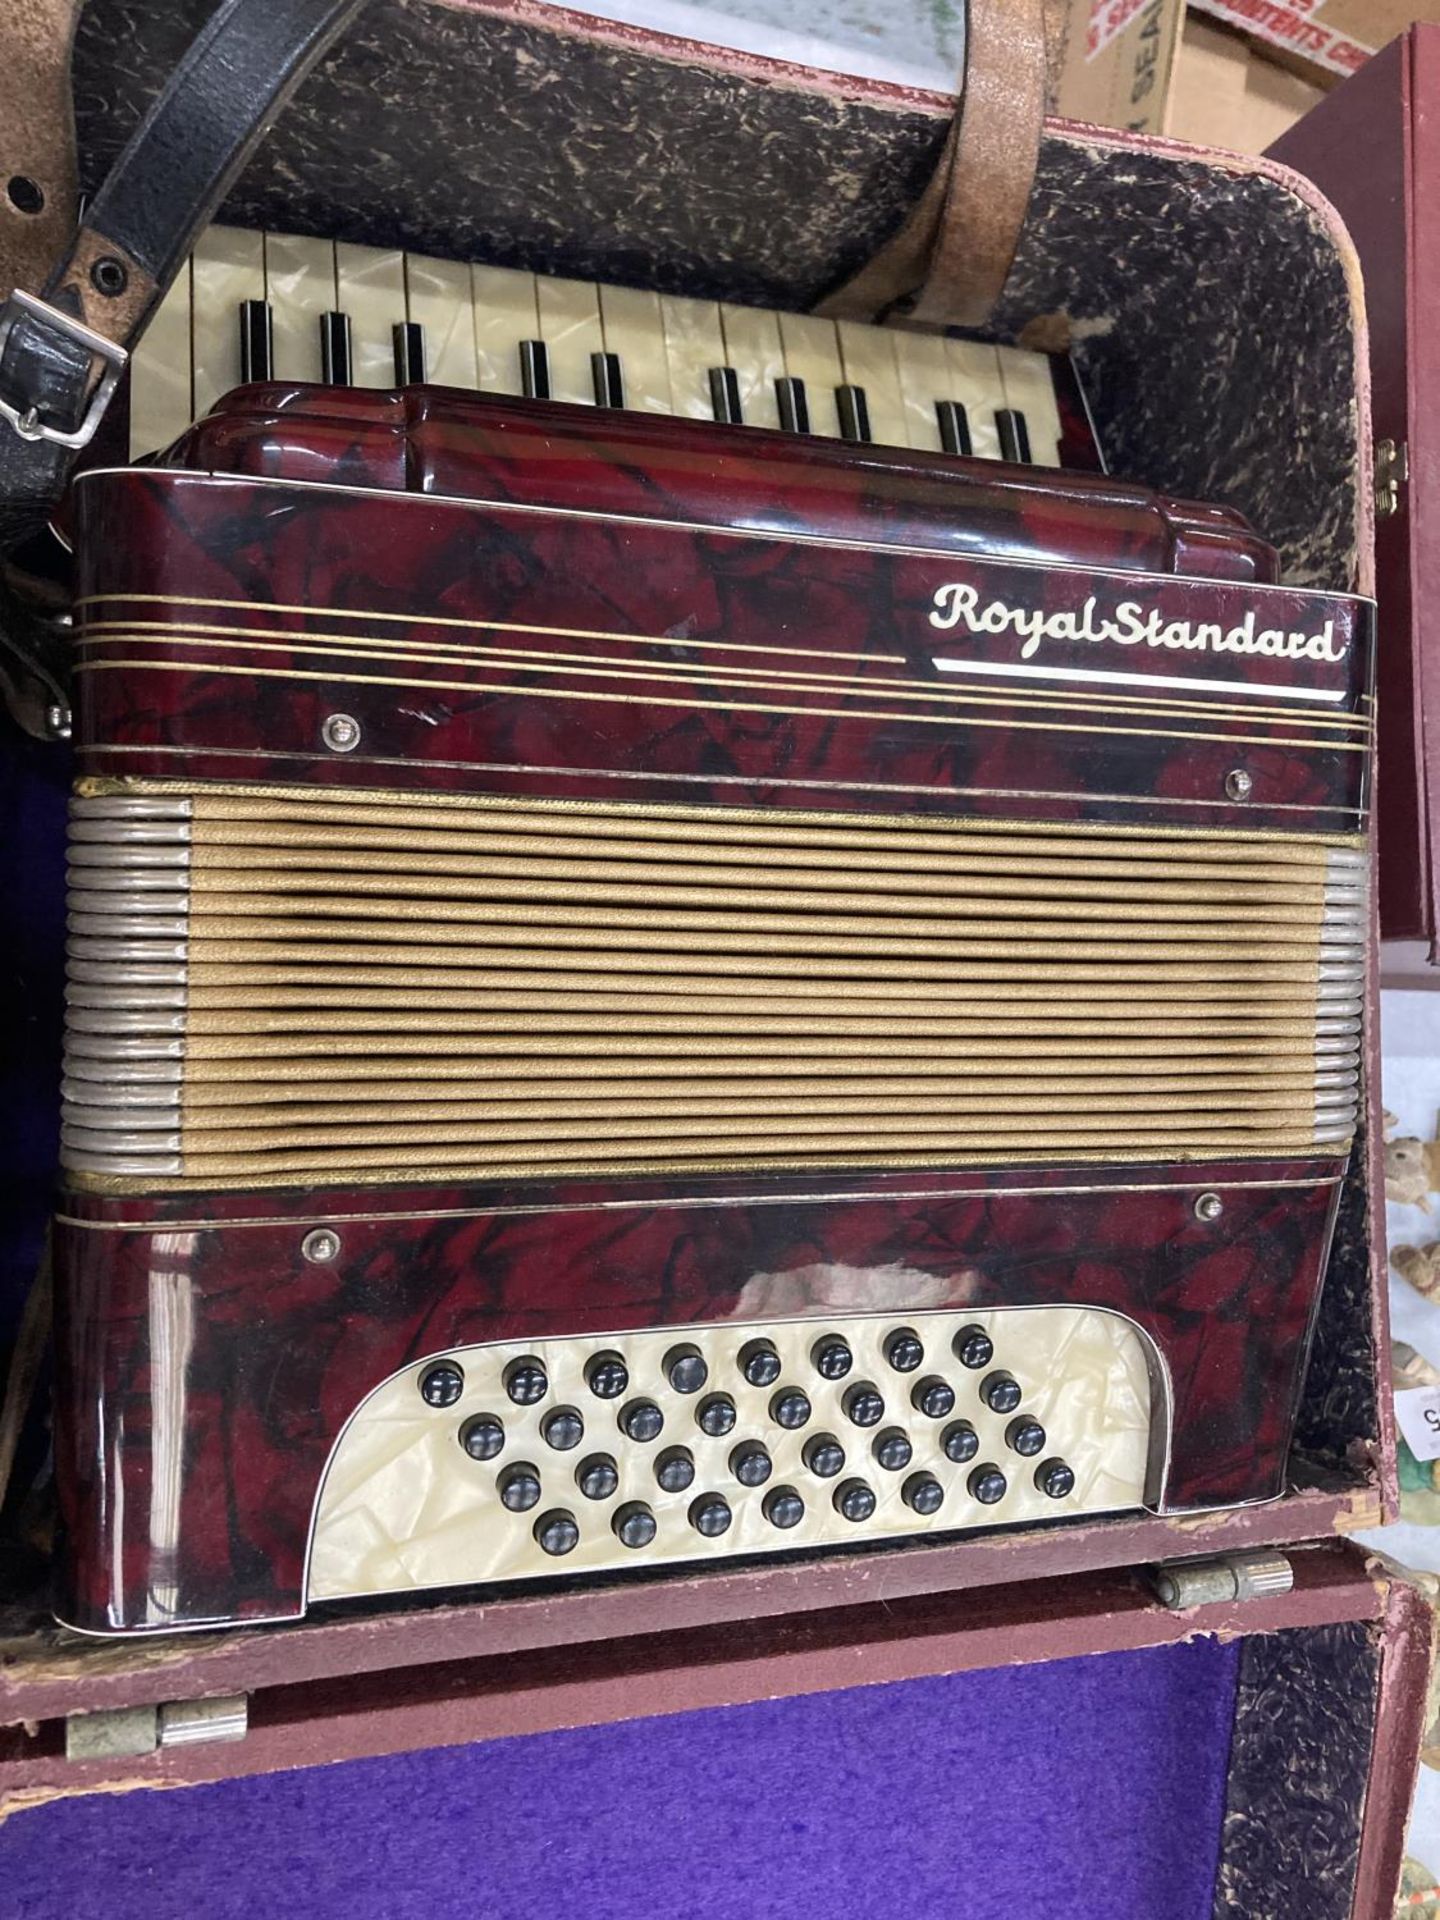 A VINTAGE ROYAL STANDARD ACCORDIAN WITH RED BAKELITE BODY IN THE ORIGINAL CASE - Image 3 of 4